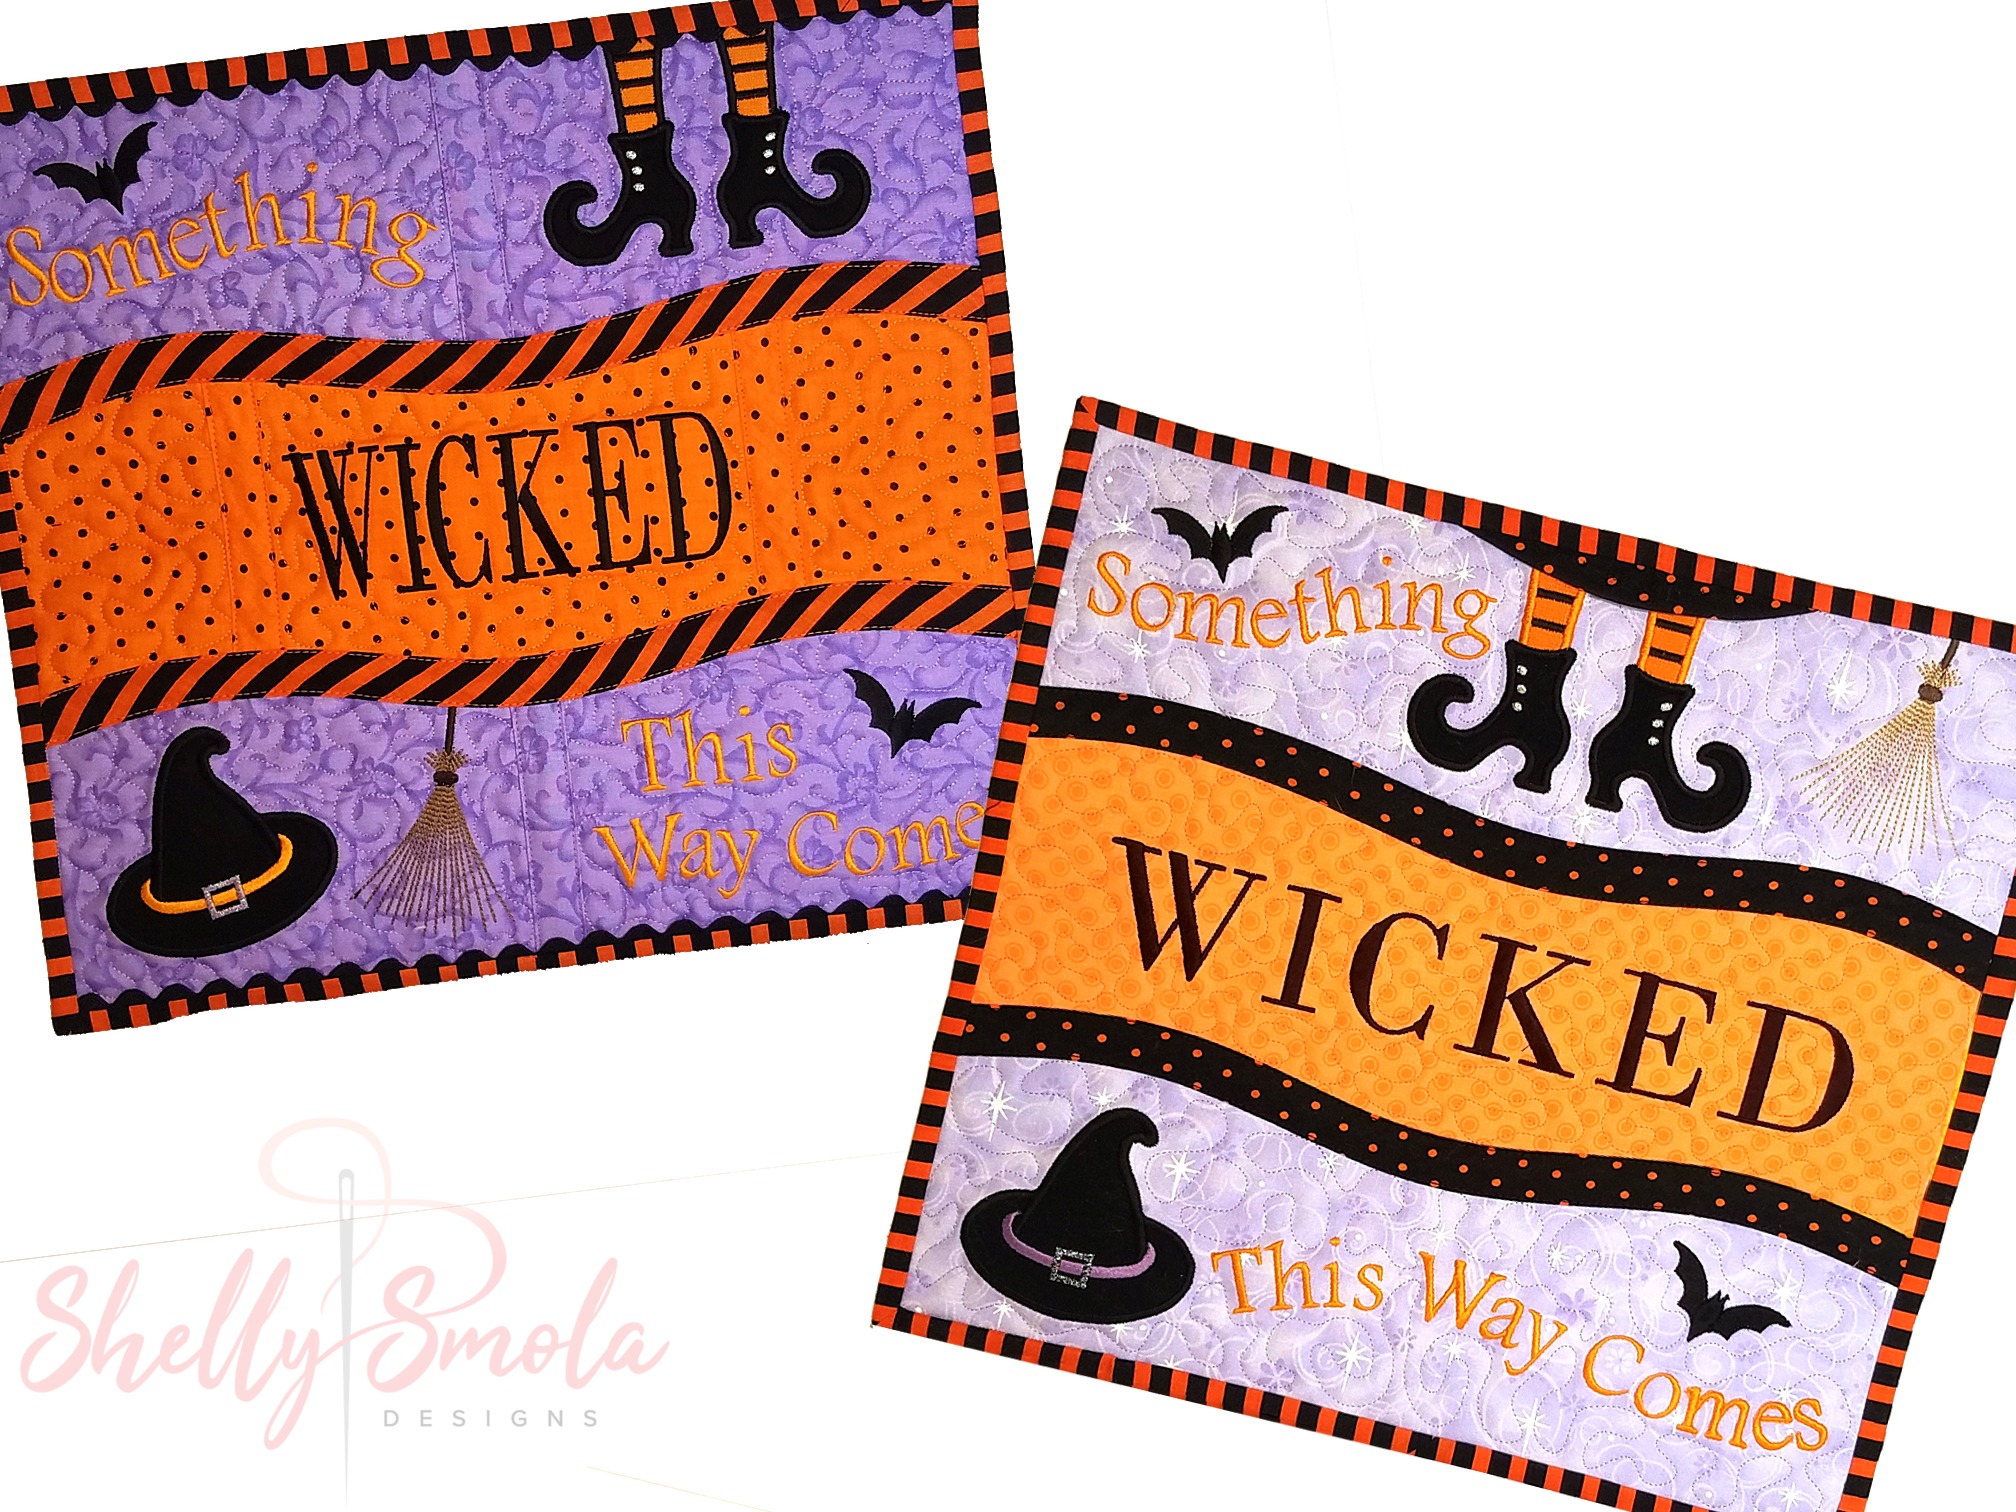 Get Wicked by Shelly Smola